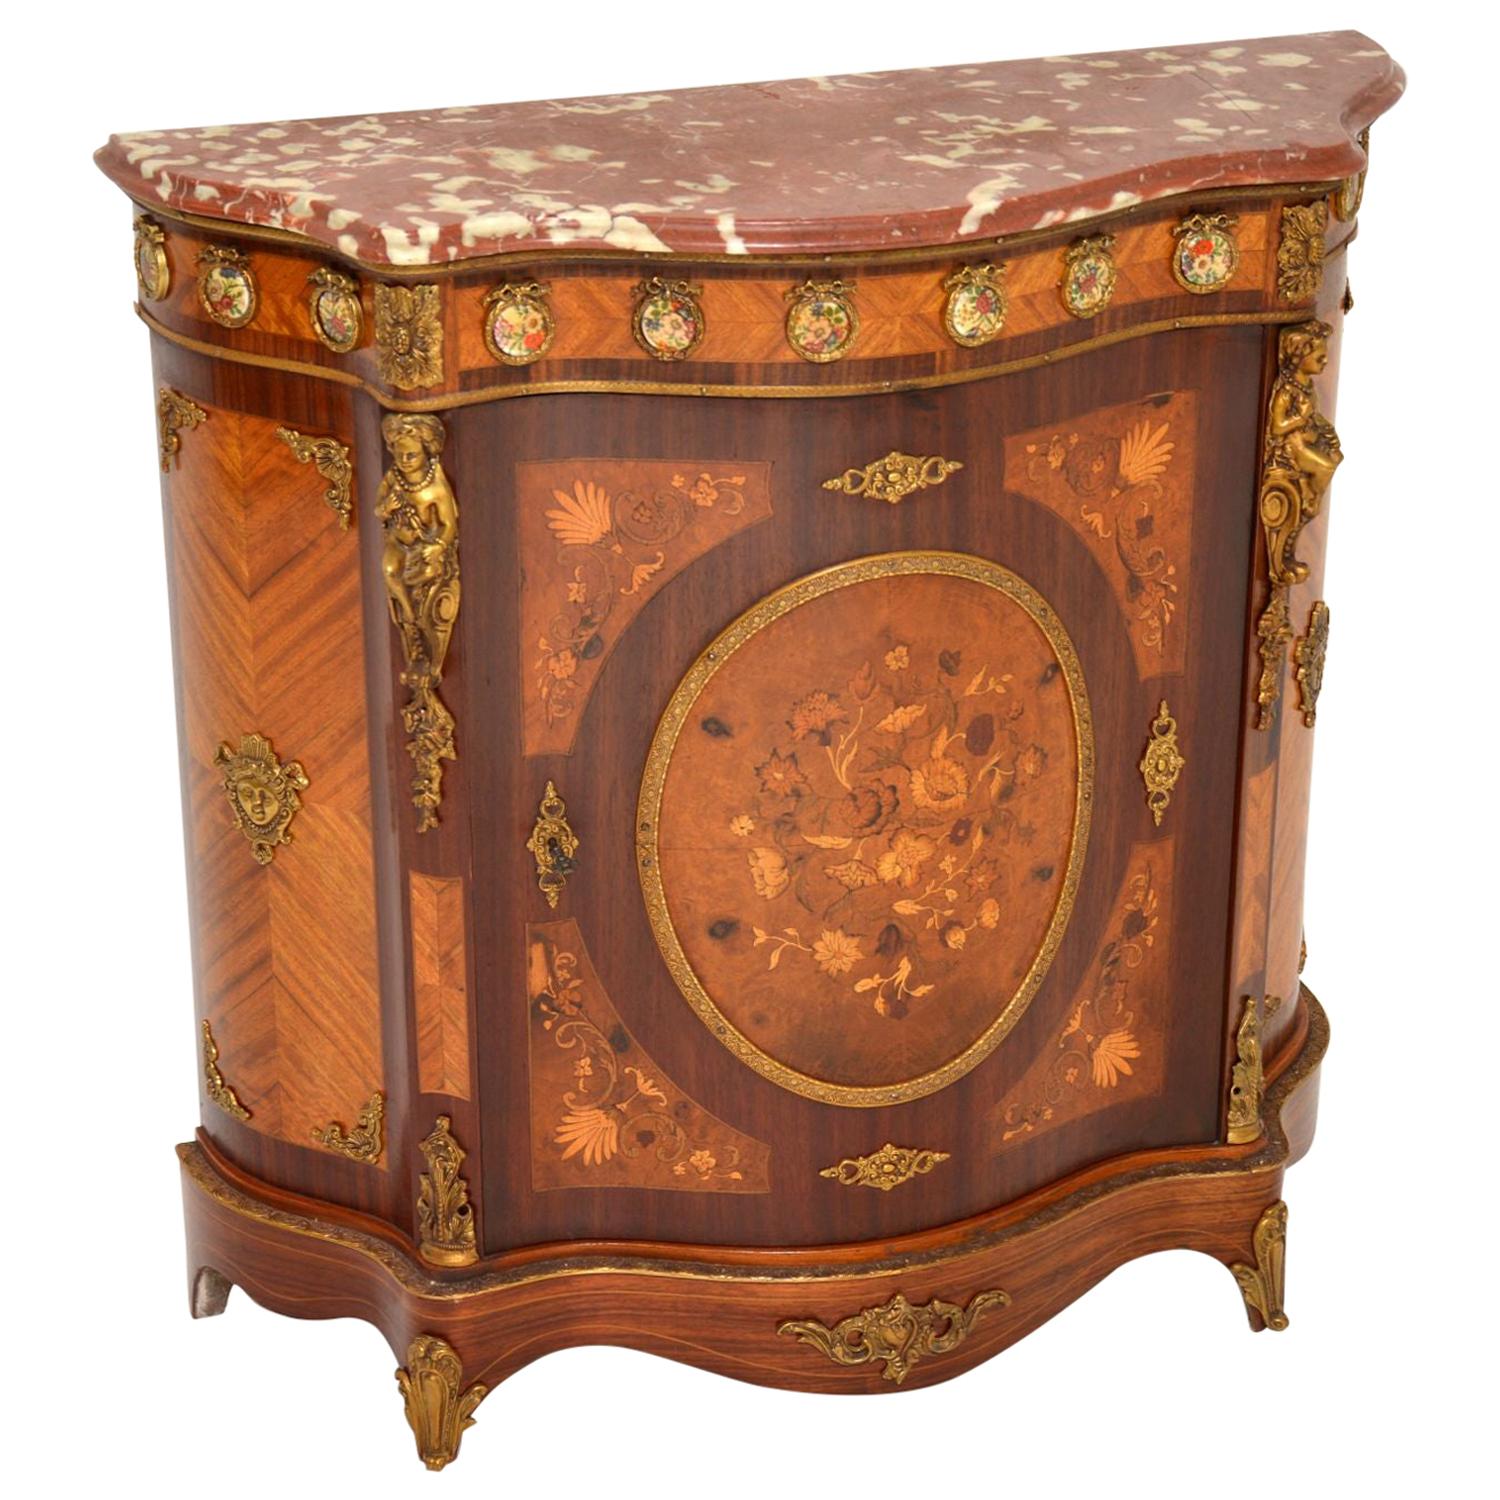 Antique French Inlaid Marquetry Marble-Top Cabinet